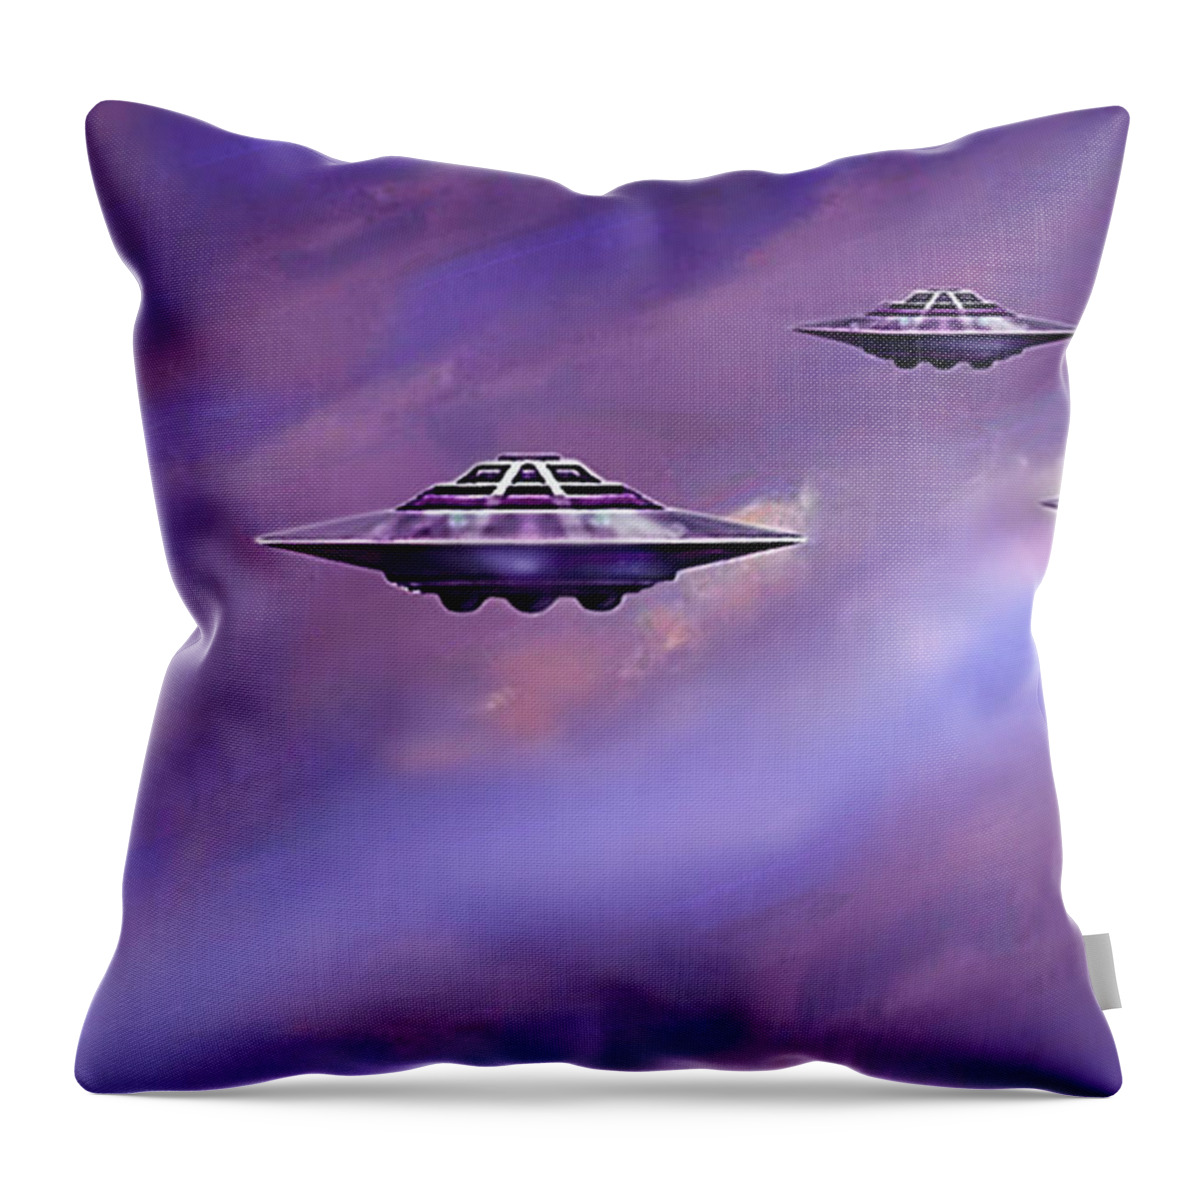 Patrolling Throw Pillow featuring the painting Sky Patrol by Hartmut Jager